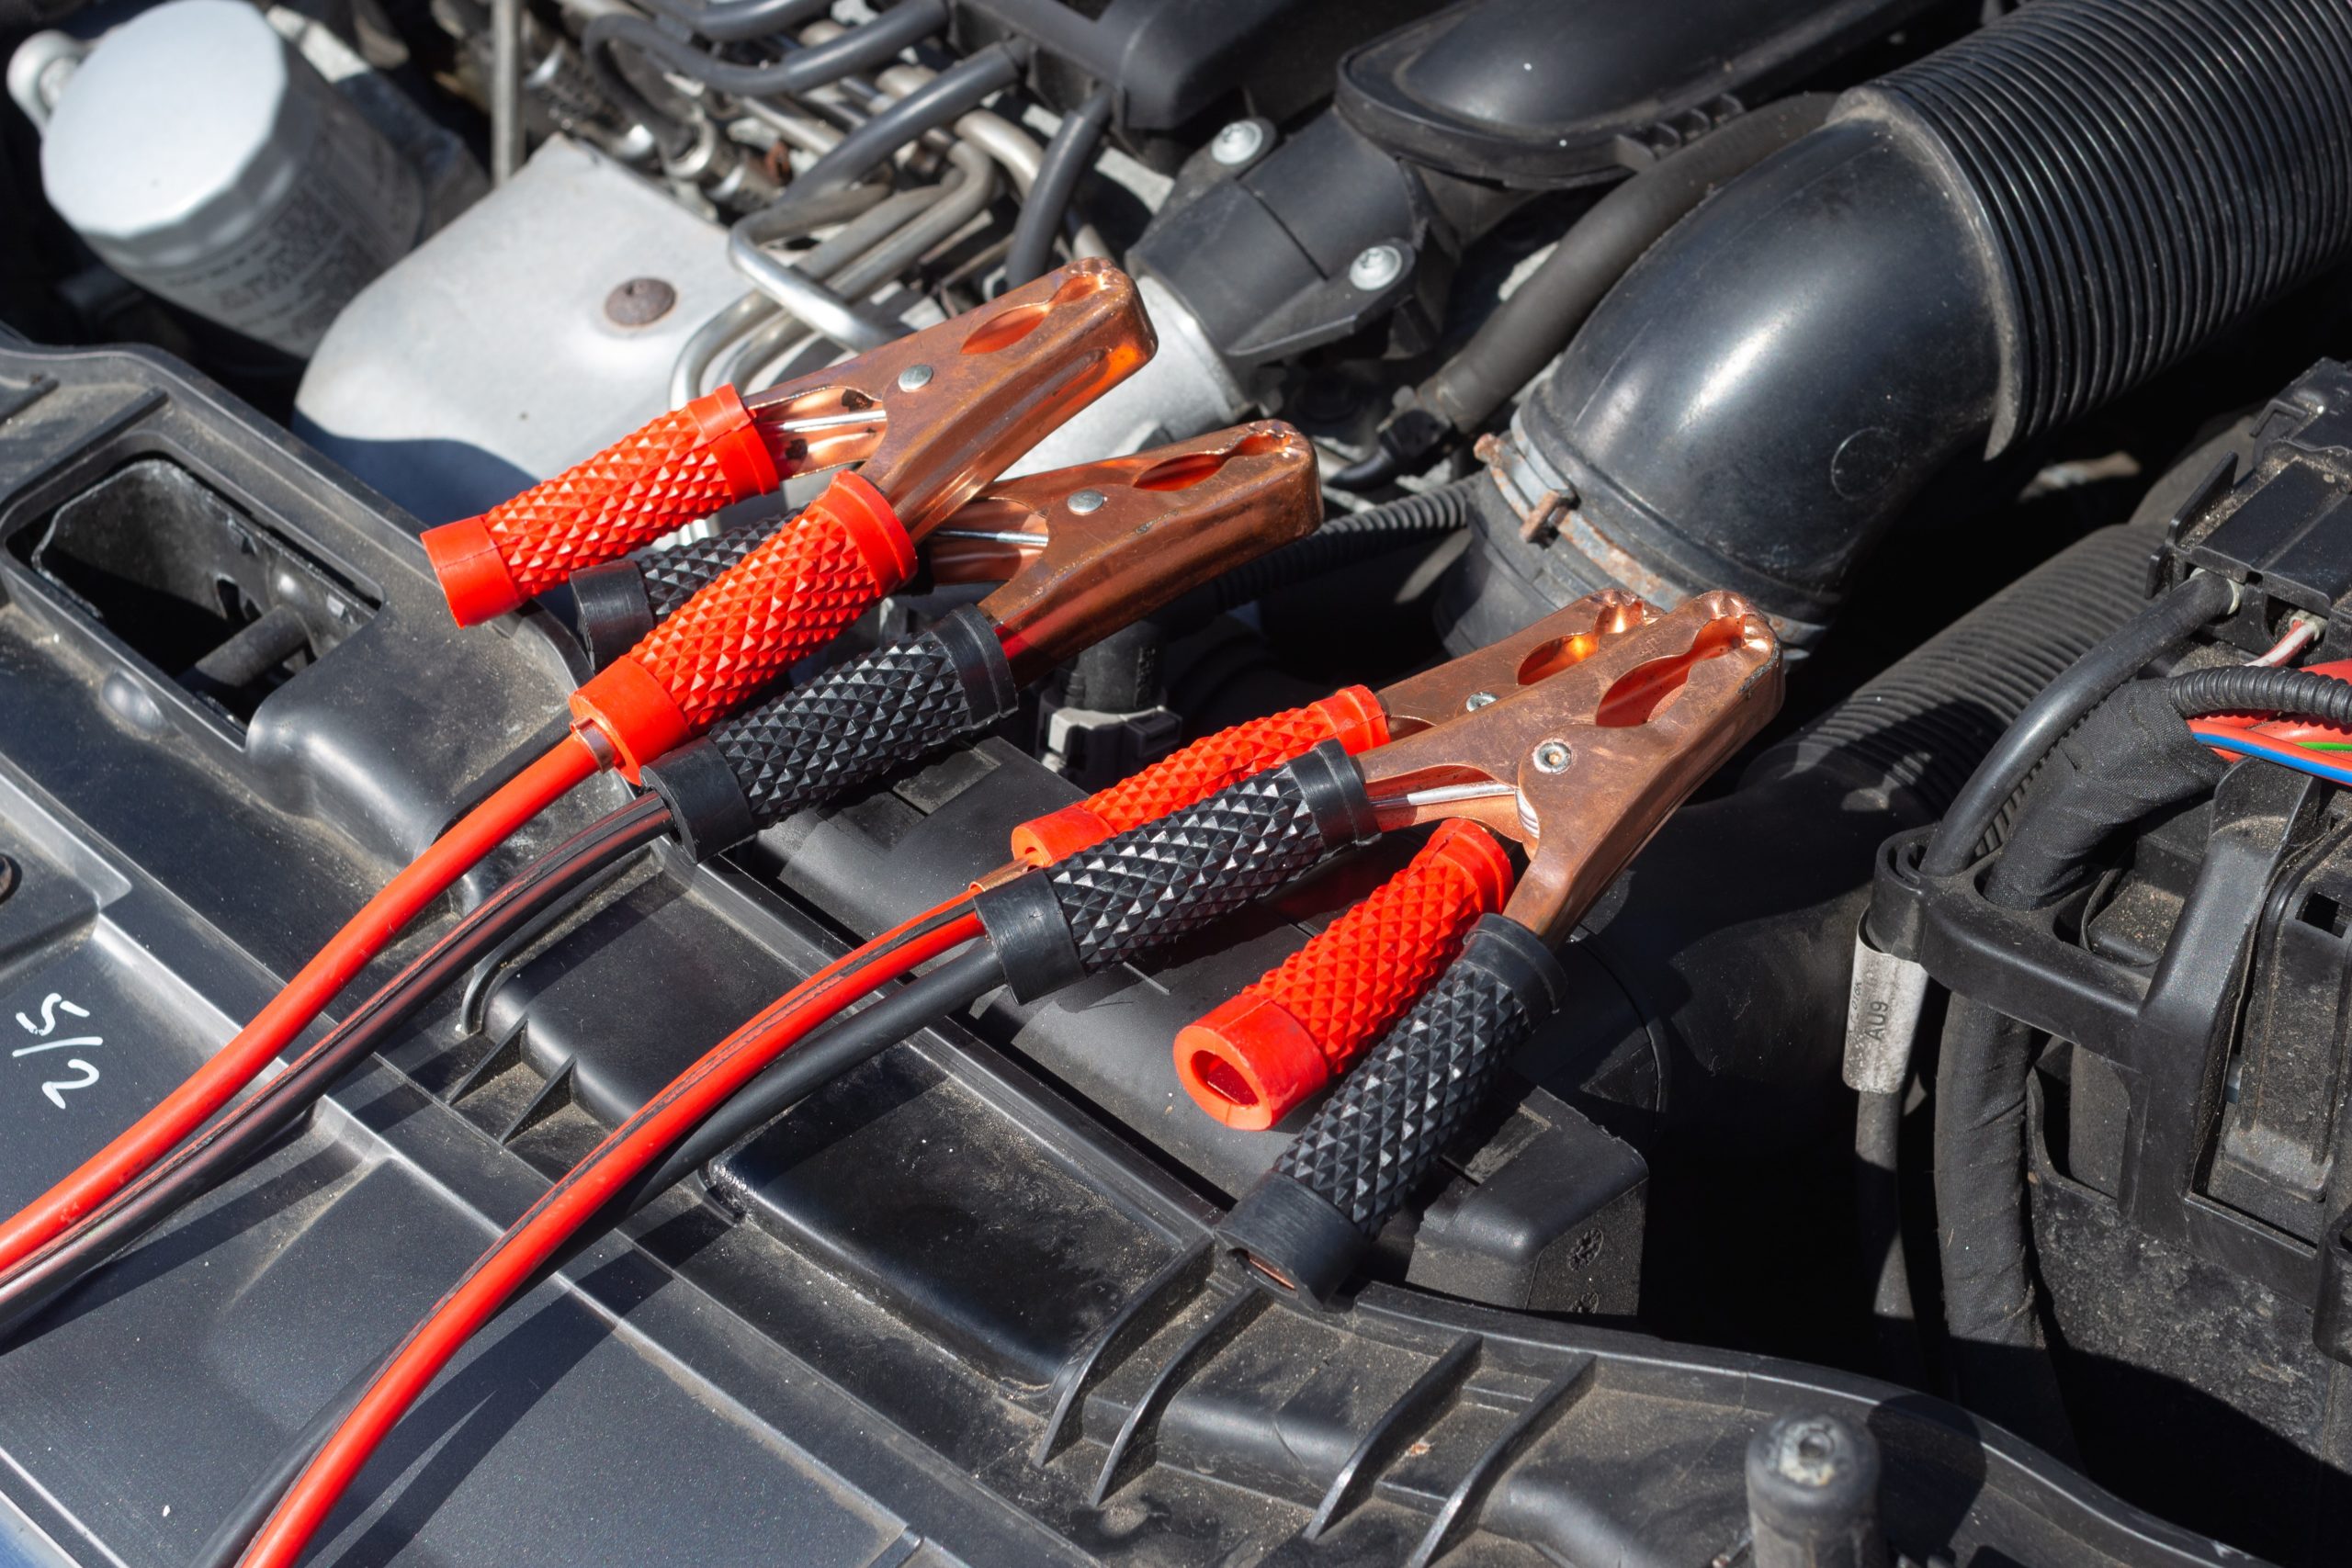 Electrical wiring attached to a car engine